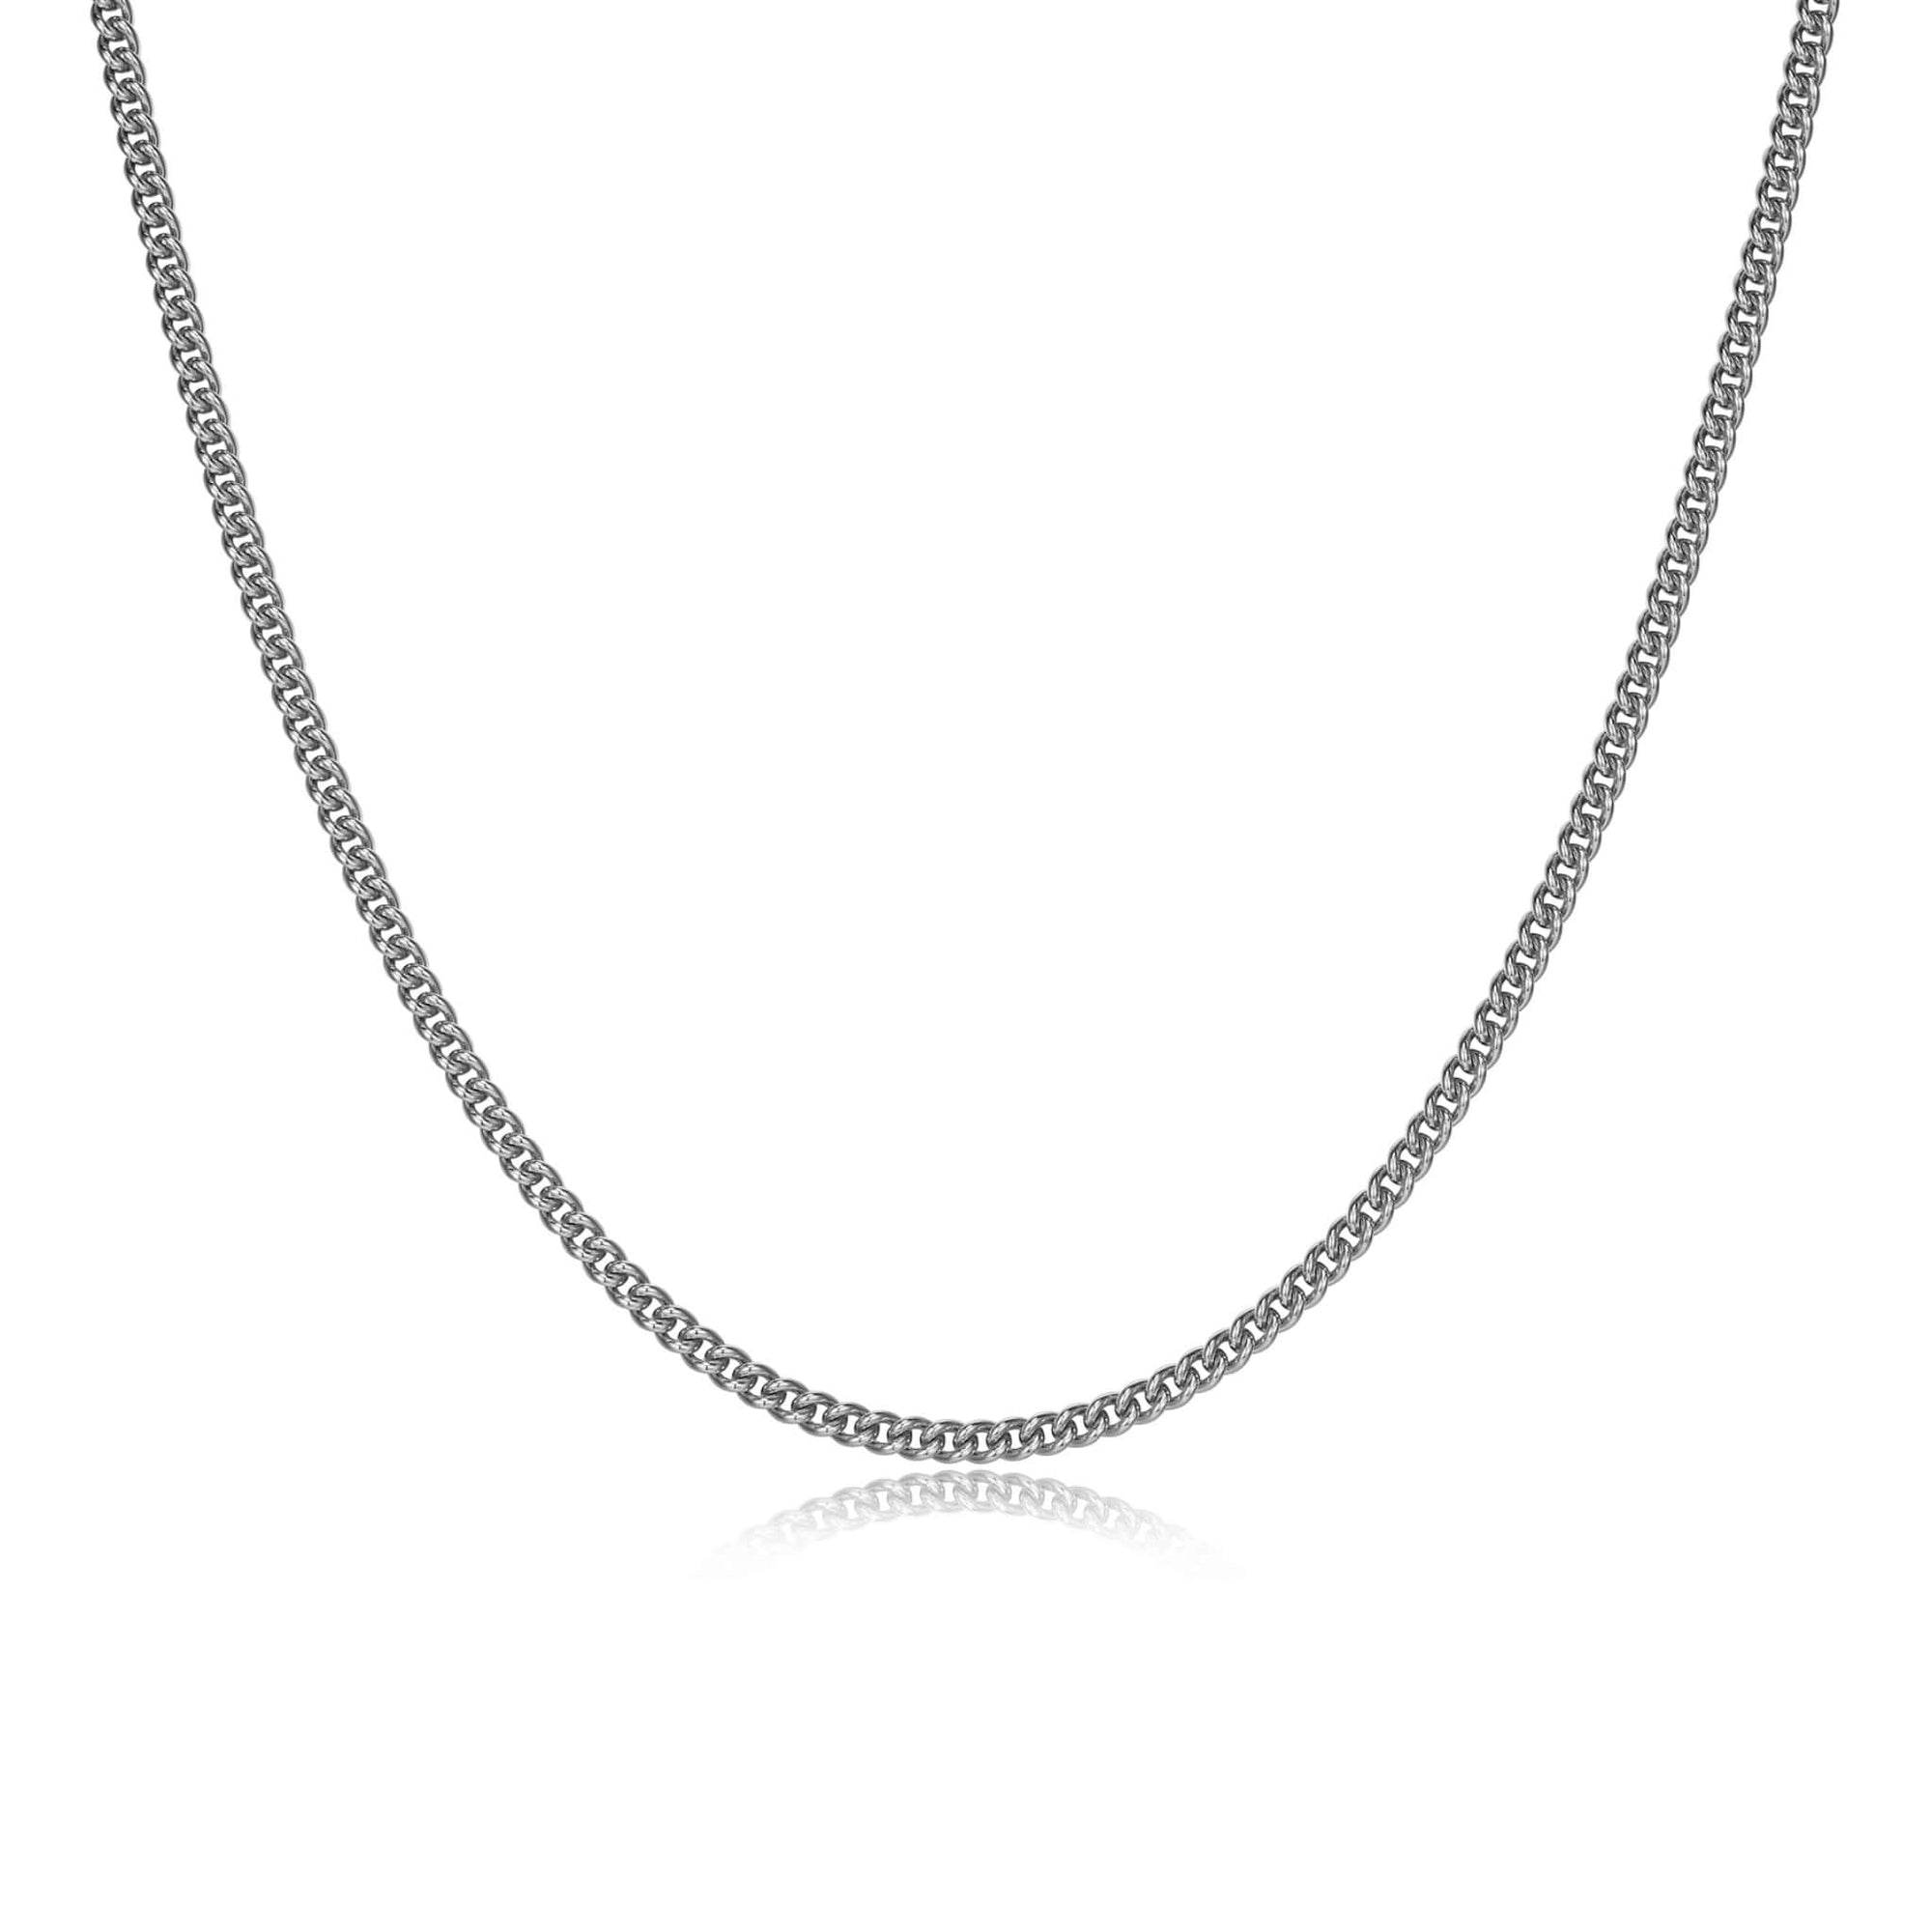 ETHOS Silver Curb Chain Necklace at Arman's Jewellers Kitchener